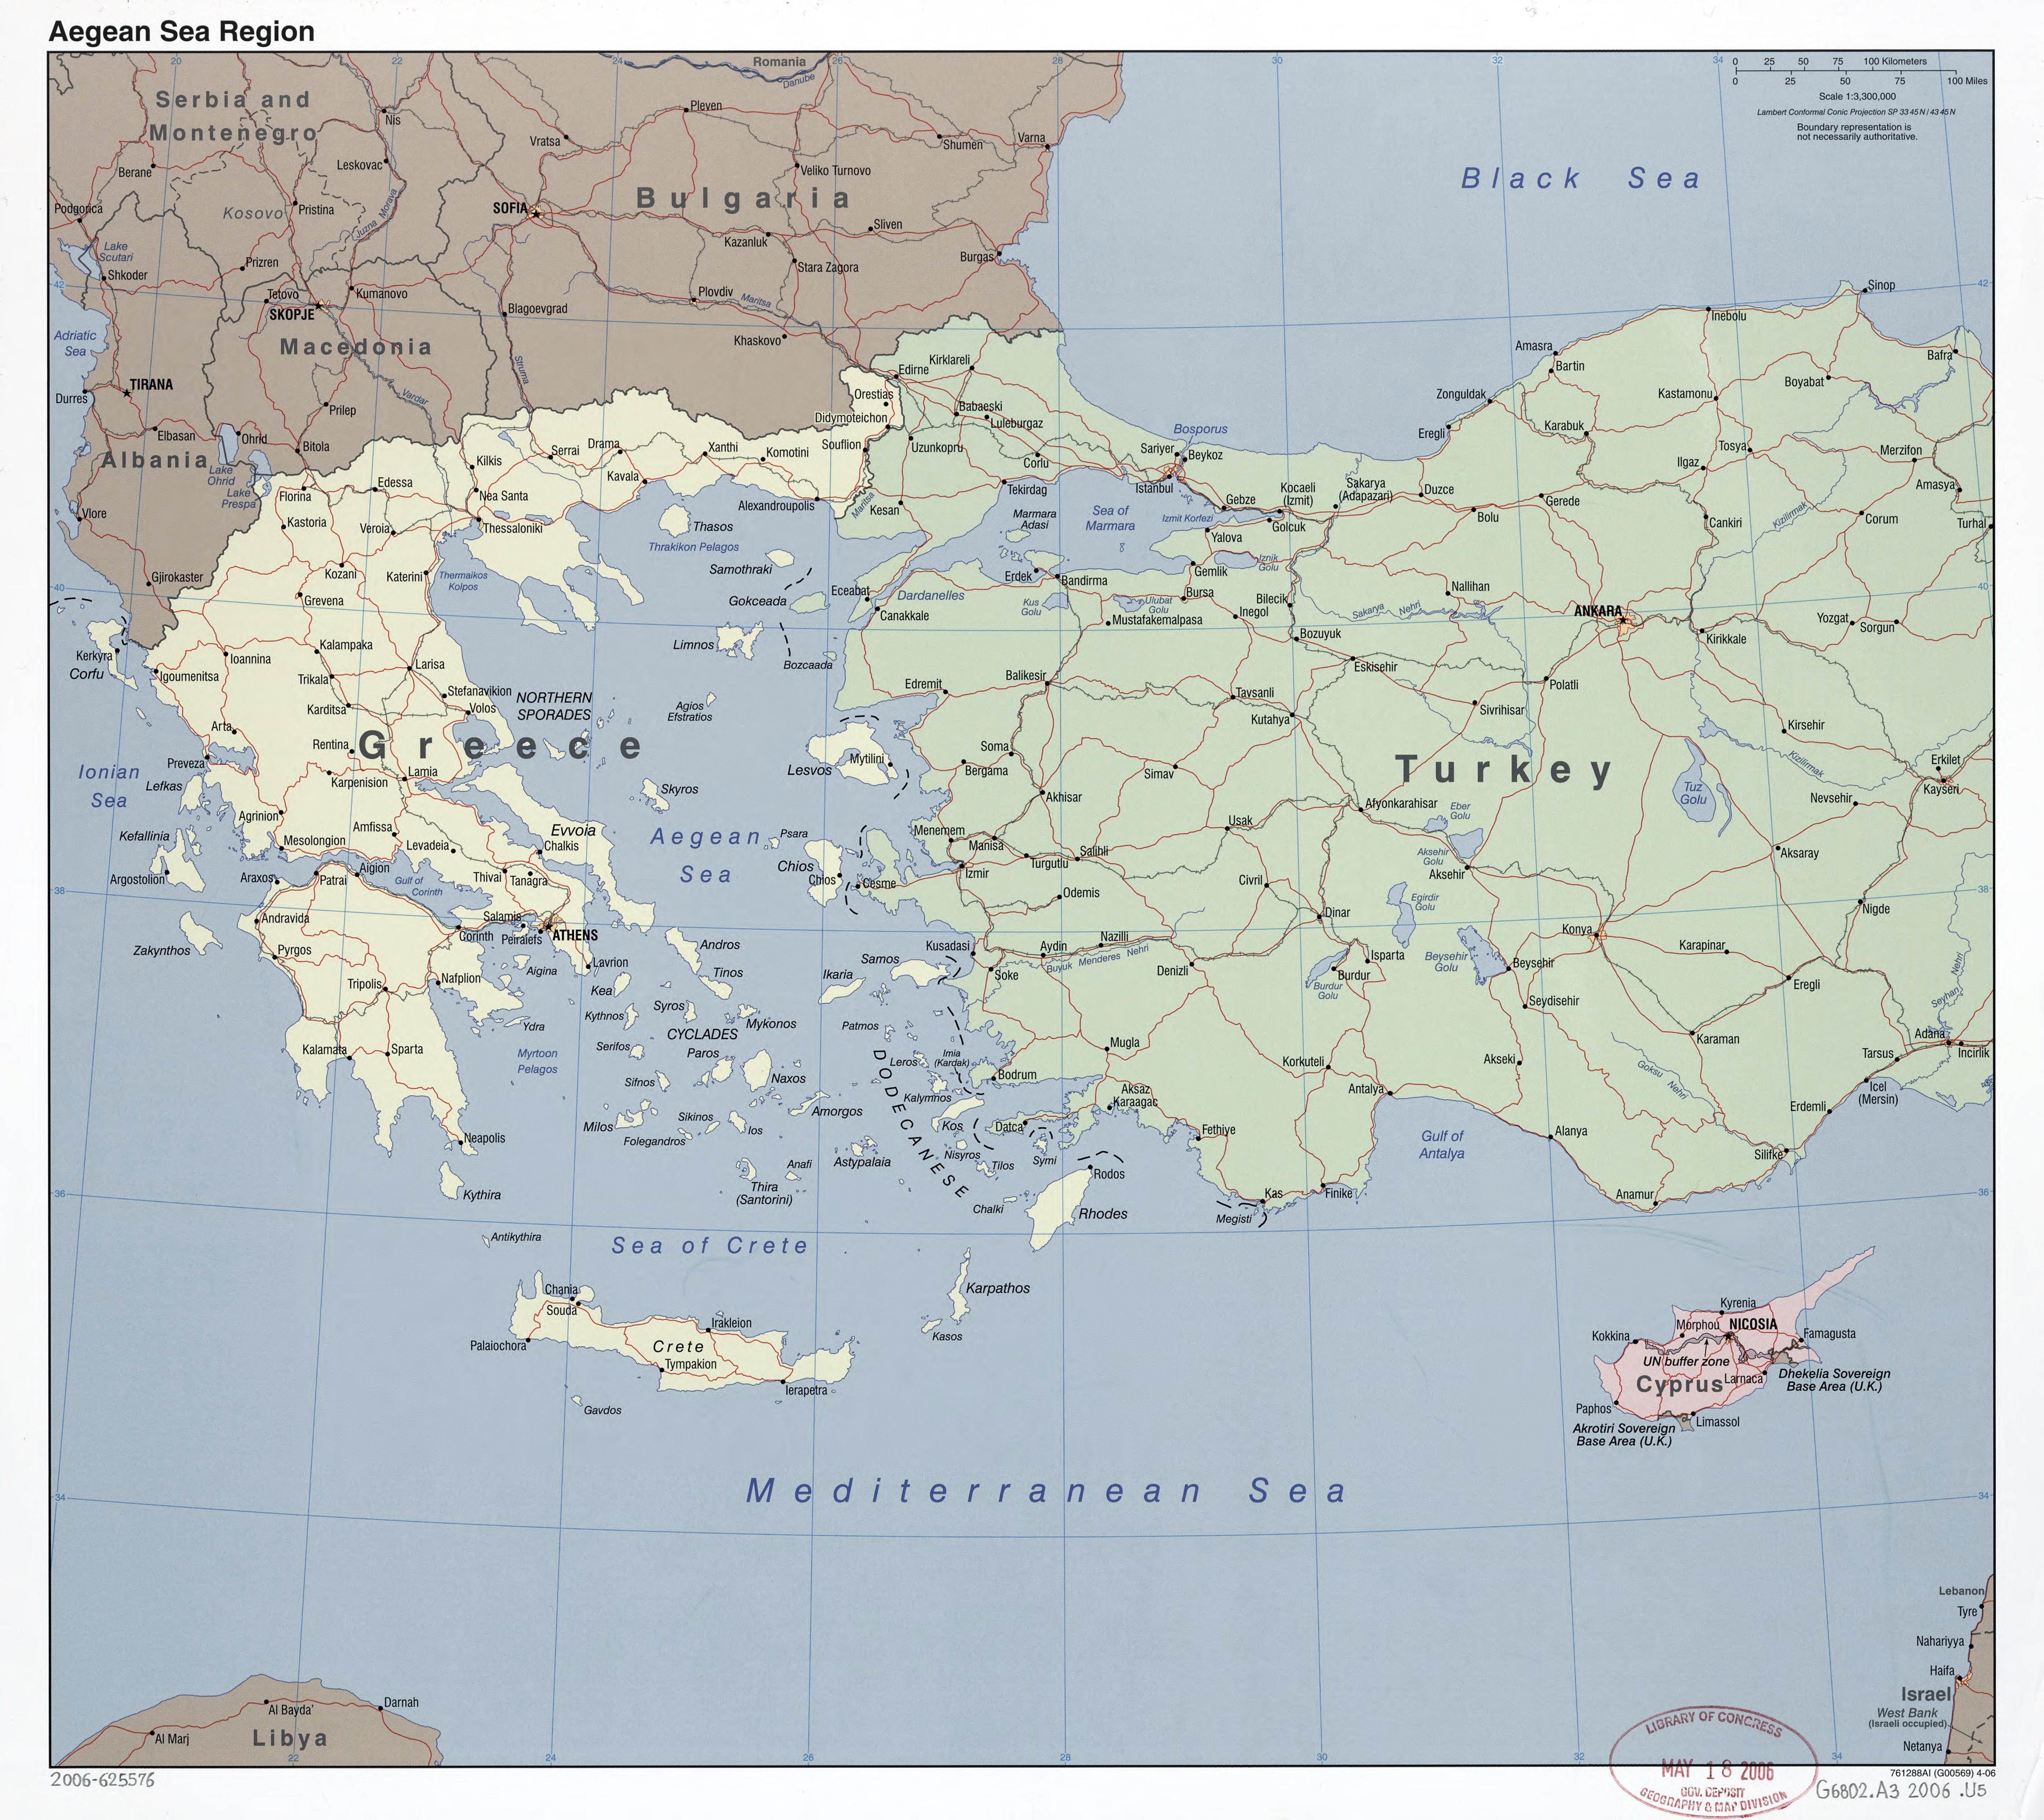 Large Detailed Political Map Of Aegean Sea Region With Roads Railroads And Major Cities 06 Turkey Asia Mapsland Maps Of The World